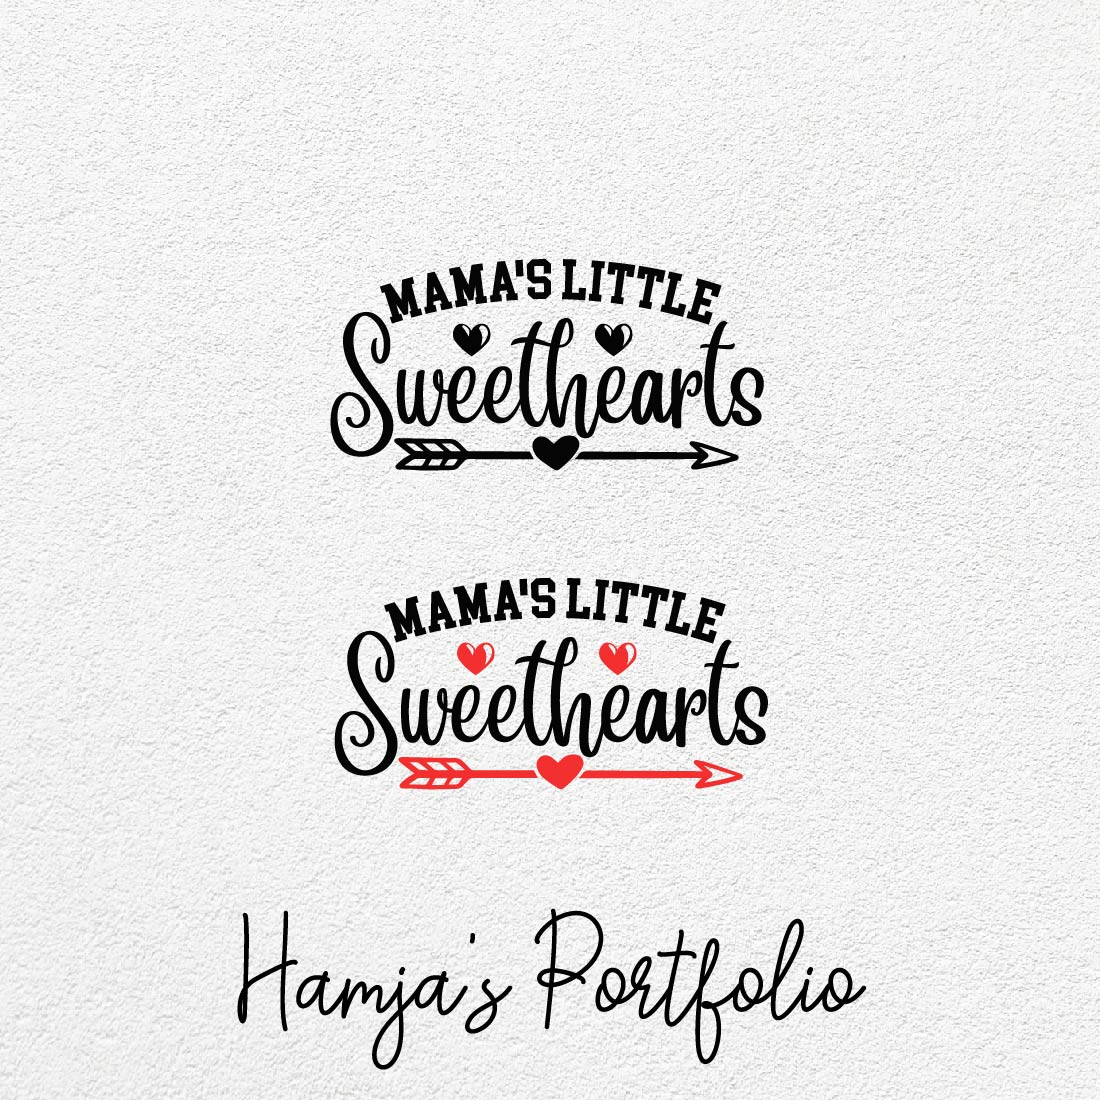 Sweethearts Vector Svg cover image.